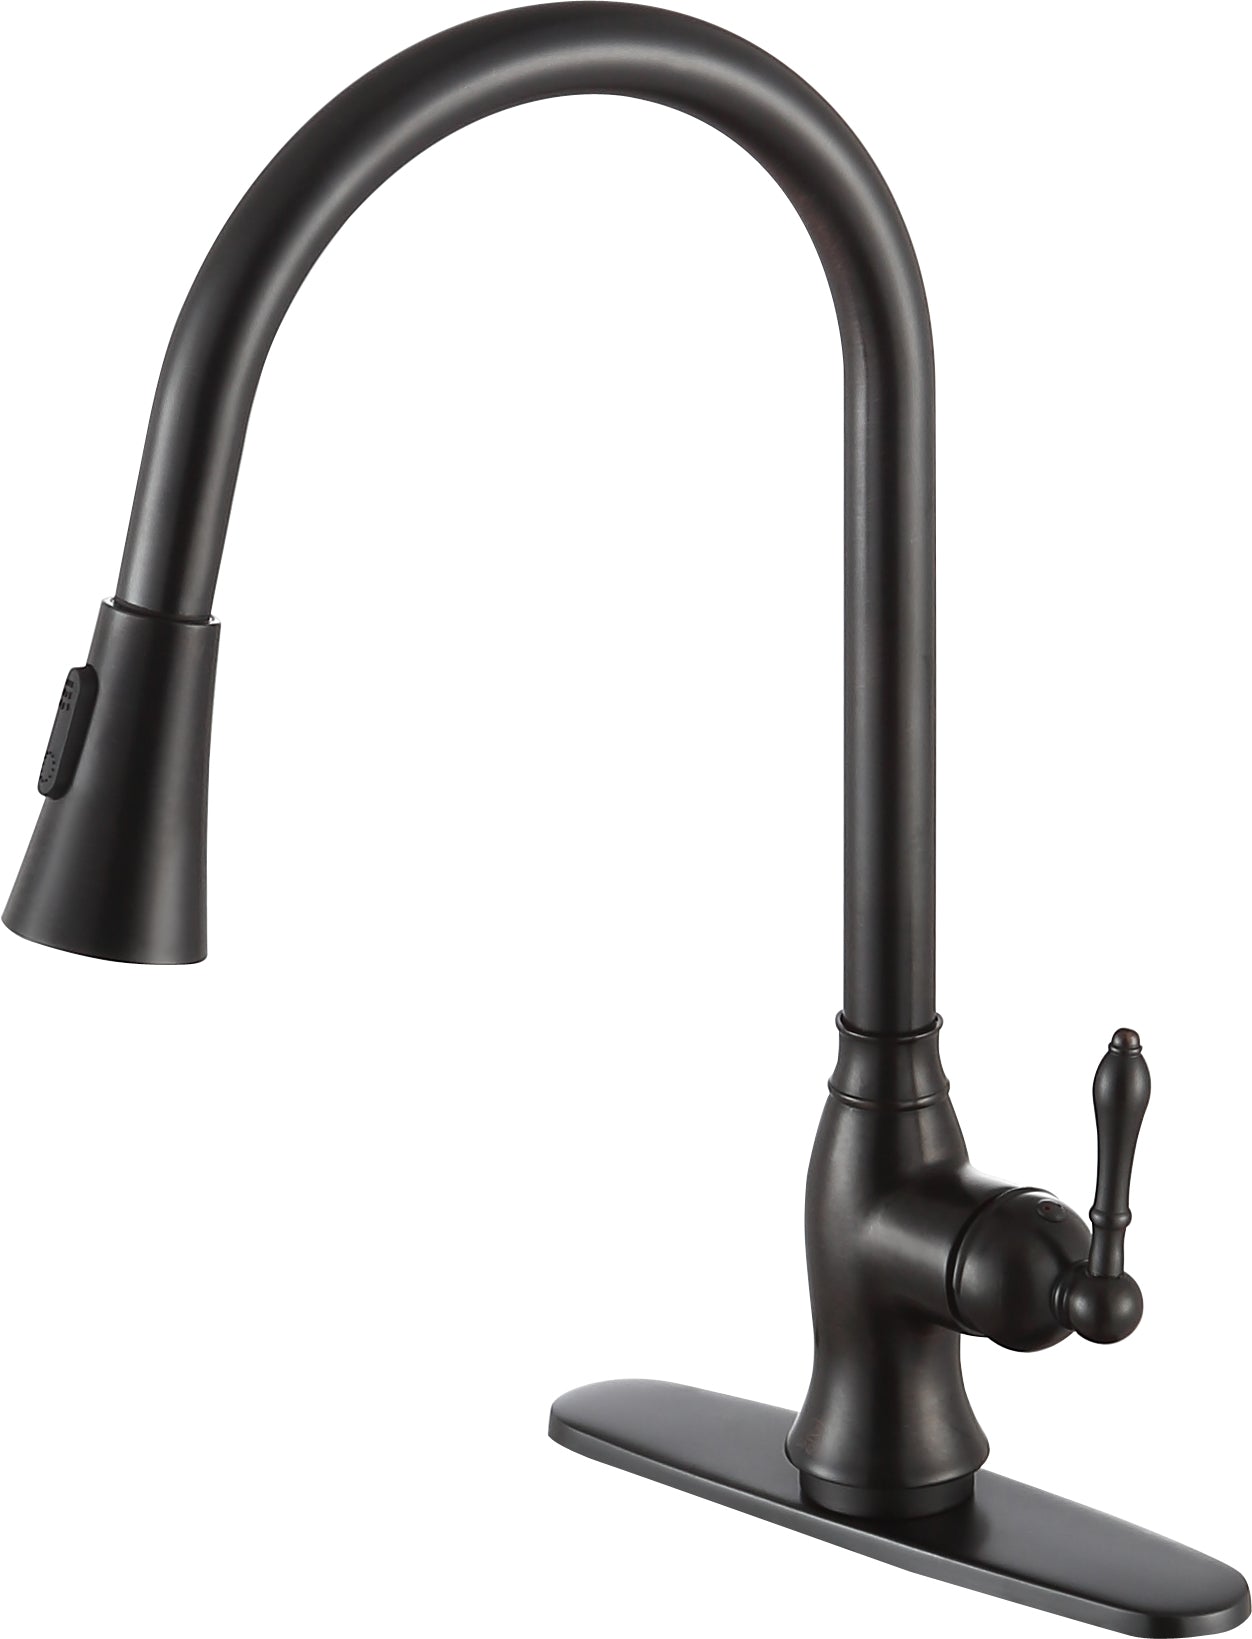 KF-AZ214ORB - Rodeo Single-Handle Pull-Out Sprayer Kitchen Faucet in Oil Rubbed Bronze